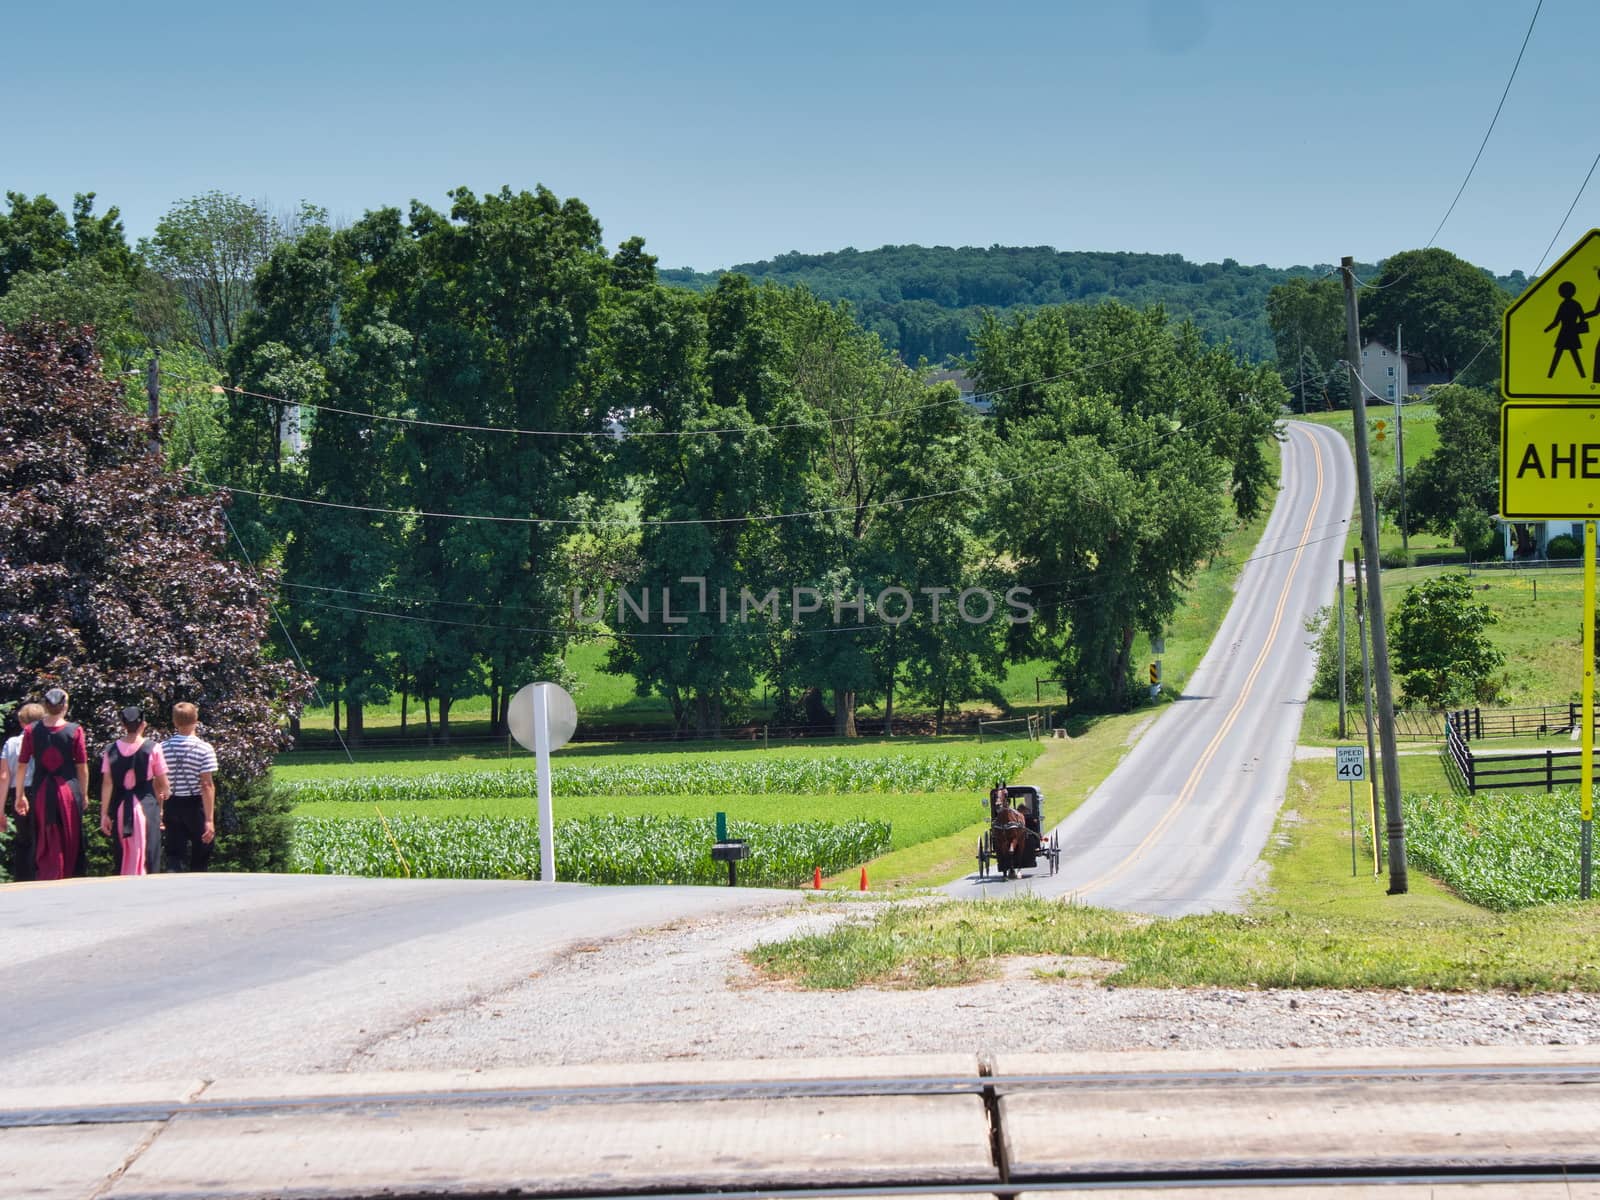 Amish Teenagers Walking Along Train Tracks with a Horse and Buggy Approaching in Countryside on a Sunny Day